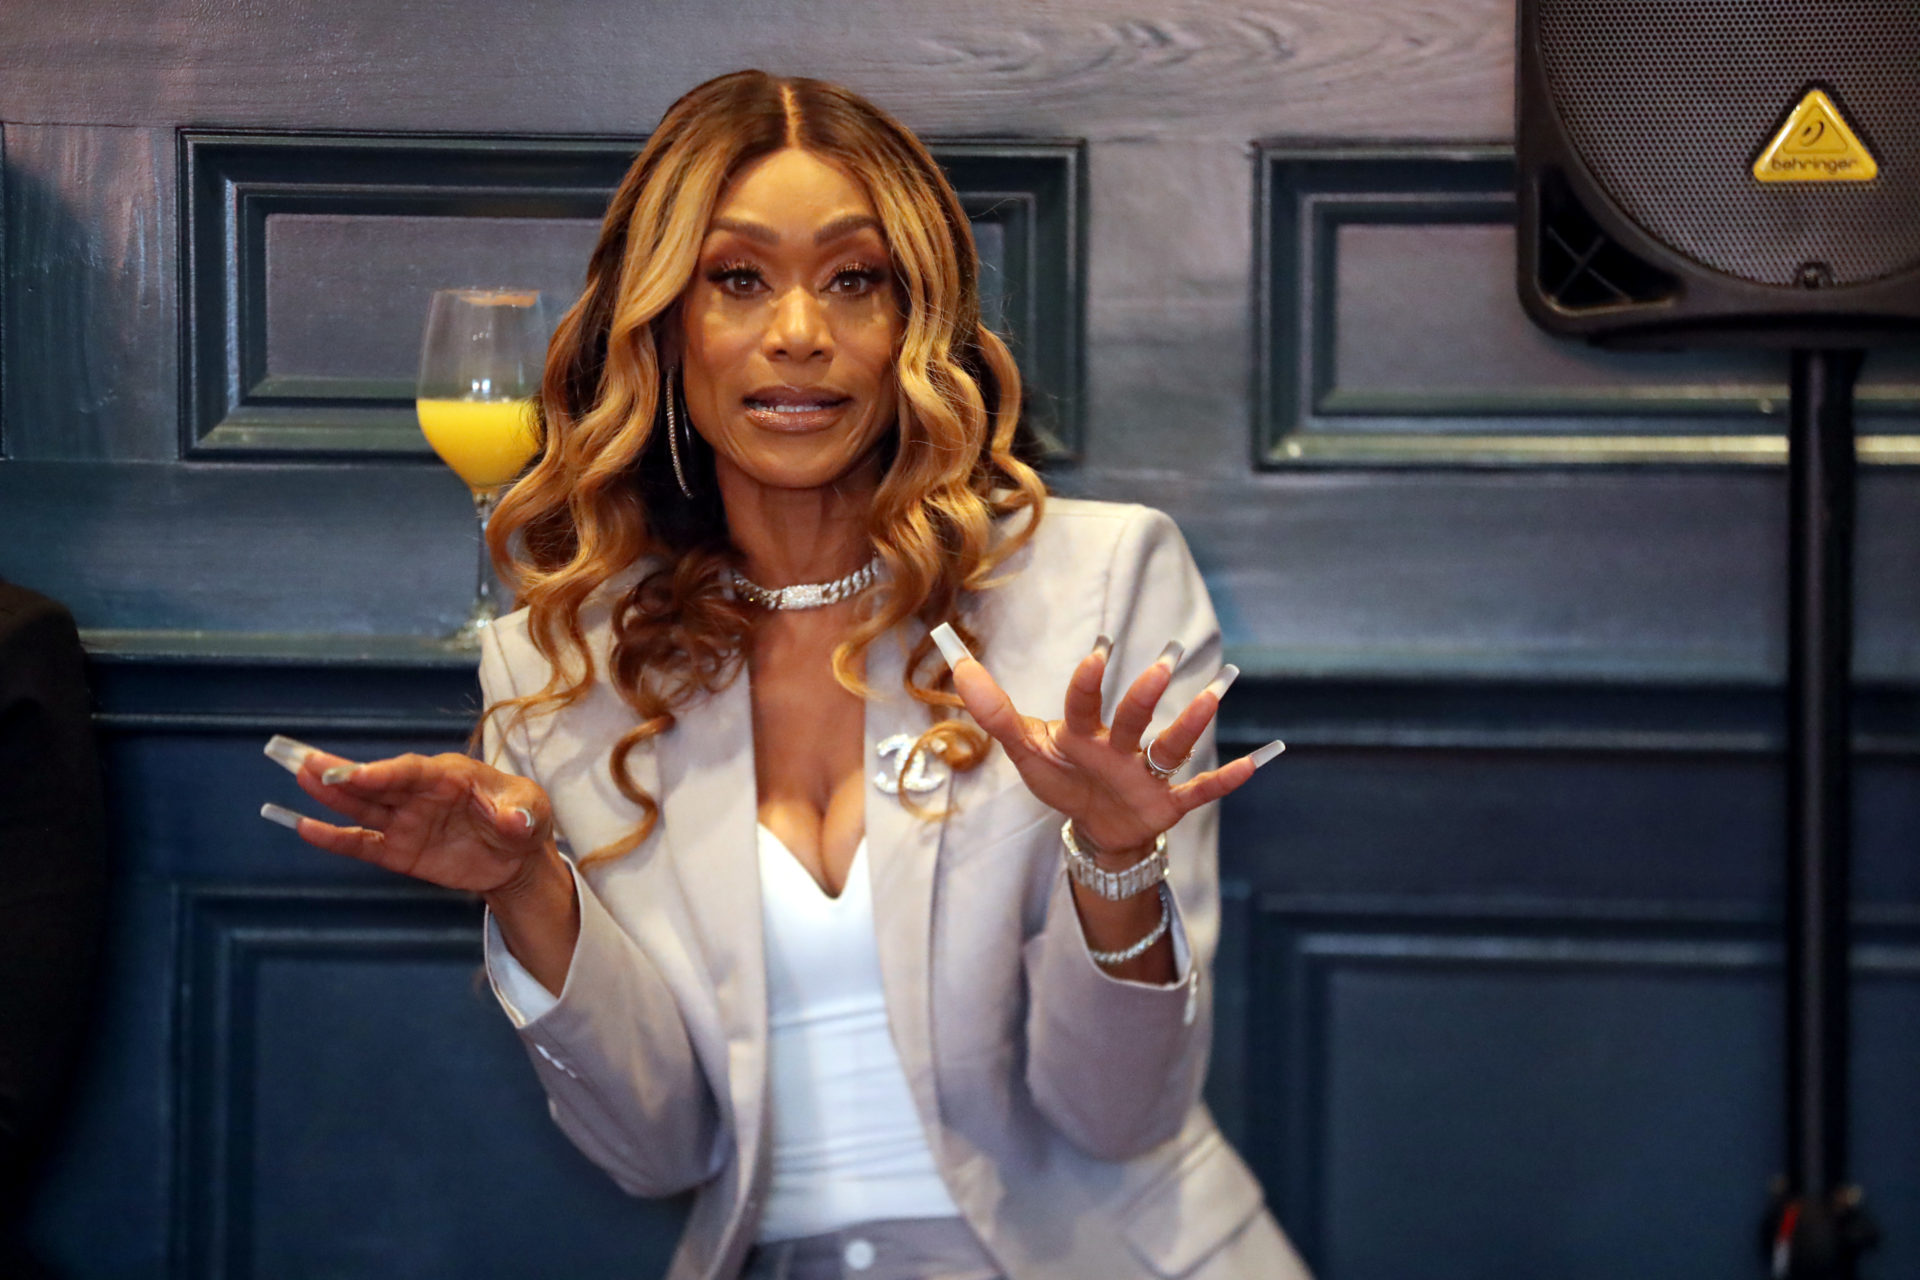 Tami Roman left Basketball Wives but kept up her wealth as an actress